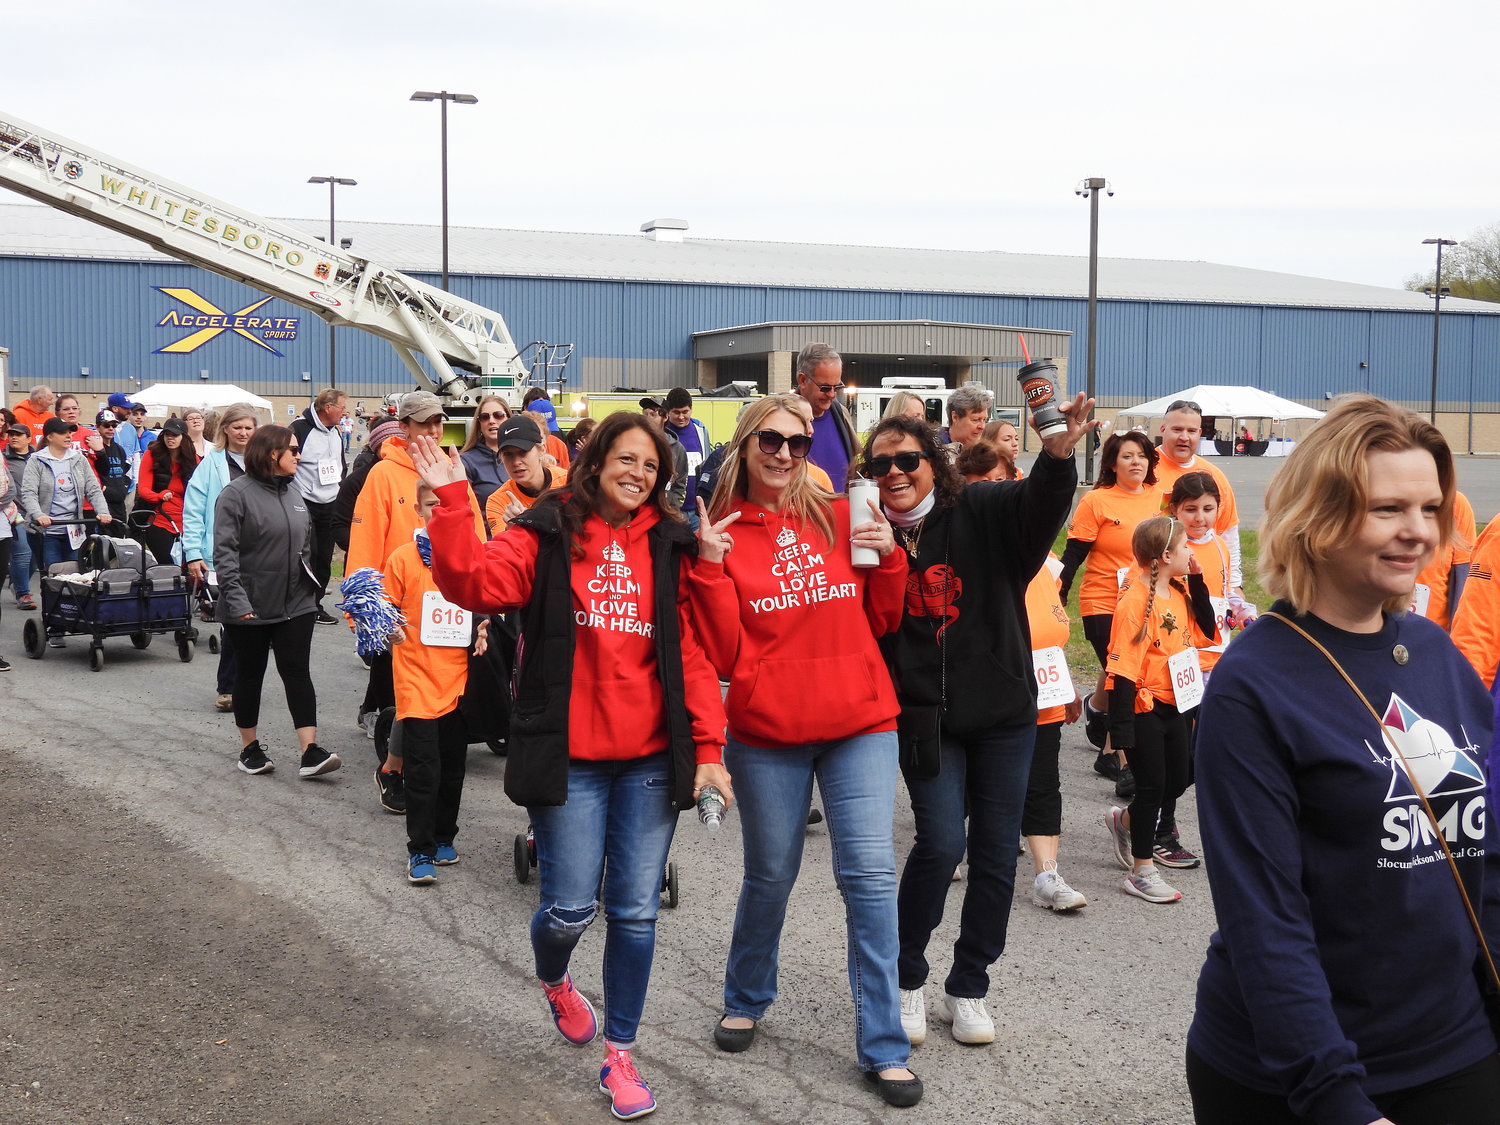 Walkers set out for the America’s Greatest Heart Run and Walk on Satuday, May 7 from Accelerate Sports, walking the 3k to raise awareness and support for heart health